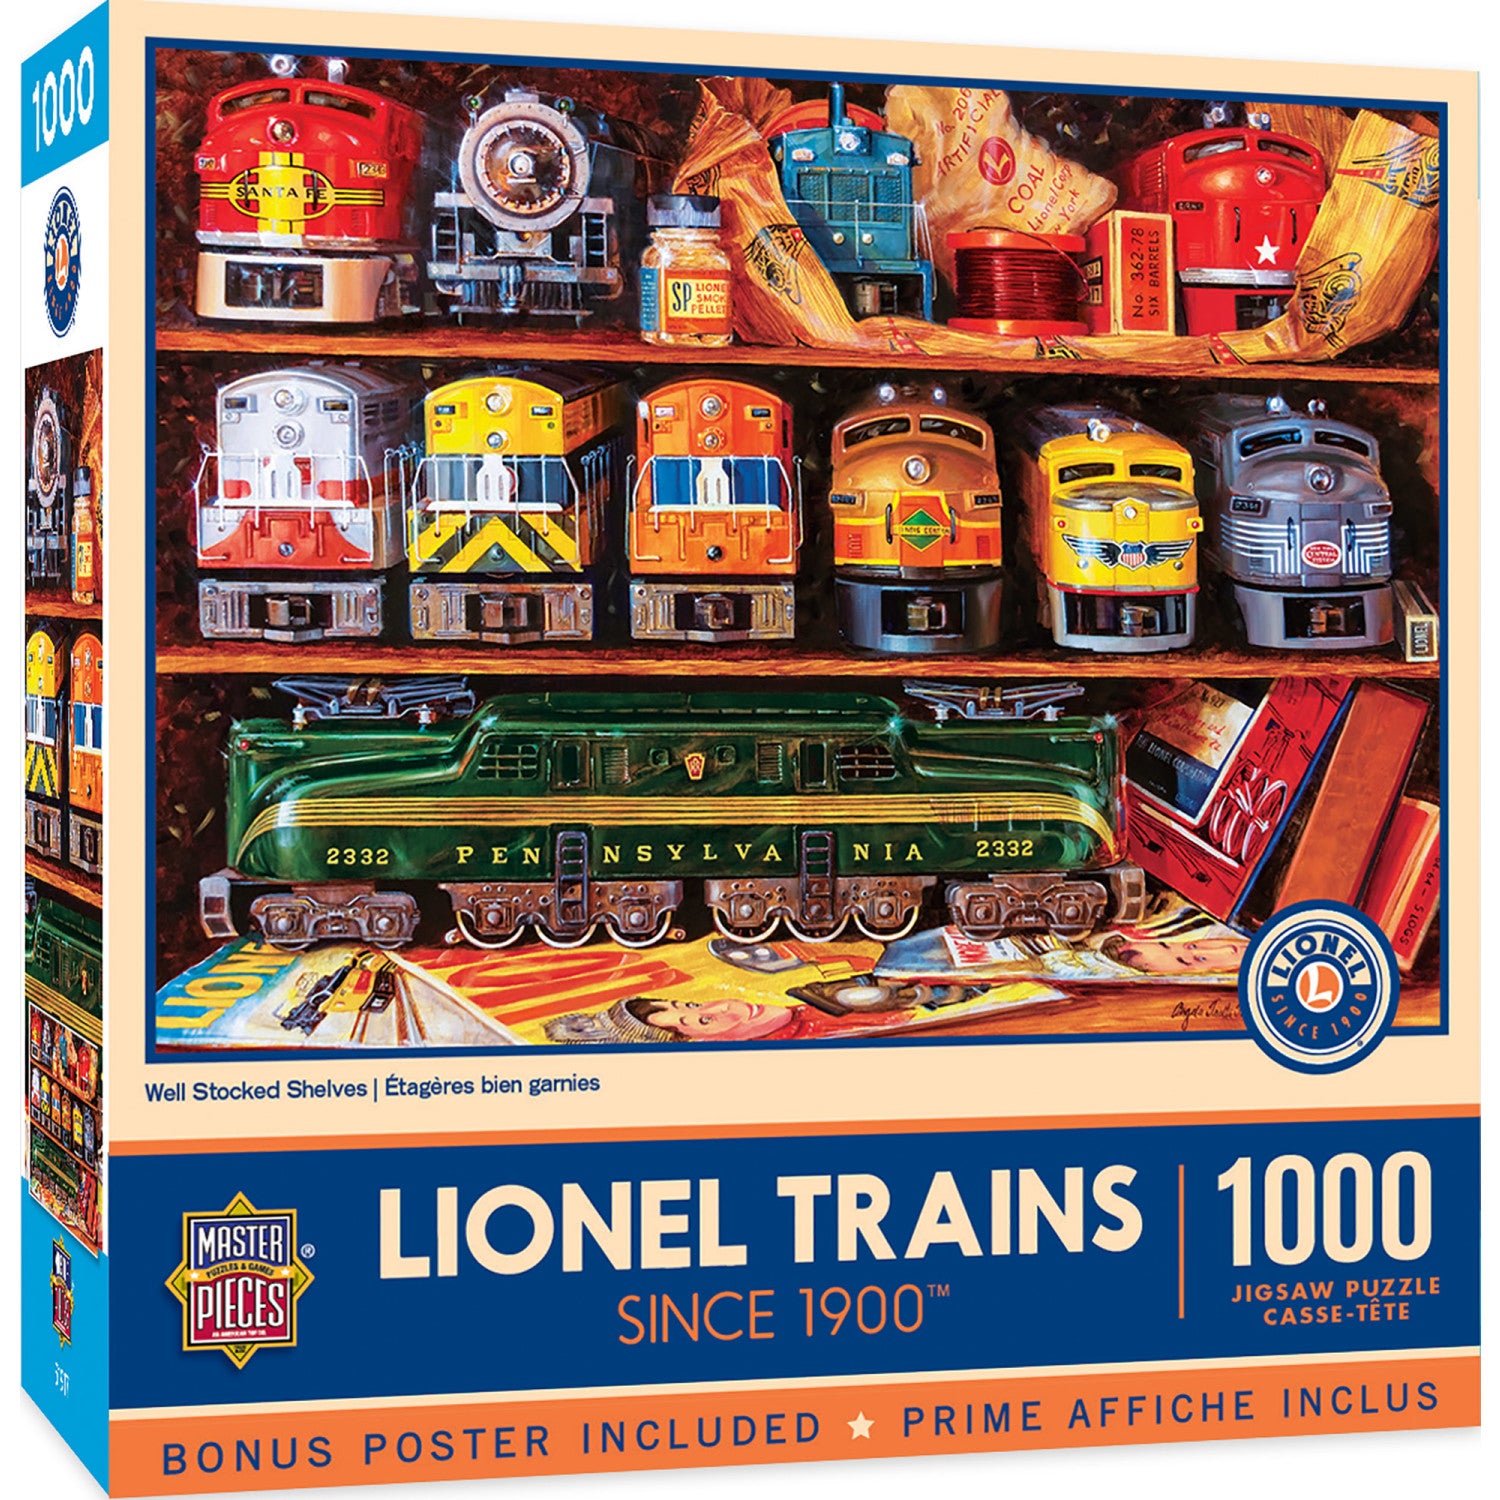 Lionel Trains - Well Stocked Shelves 1000 Piece Jigsaw Puzzle